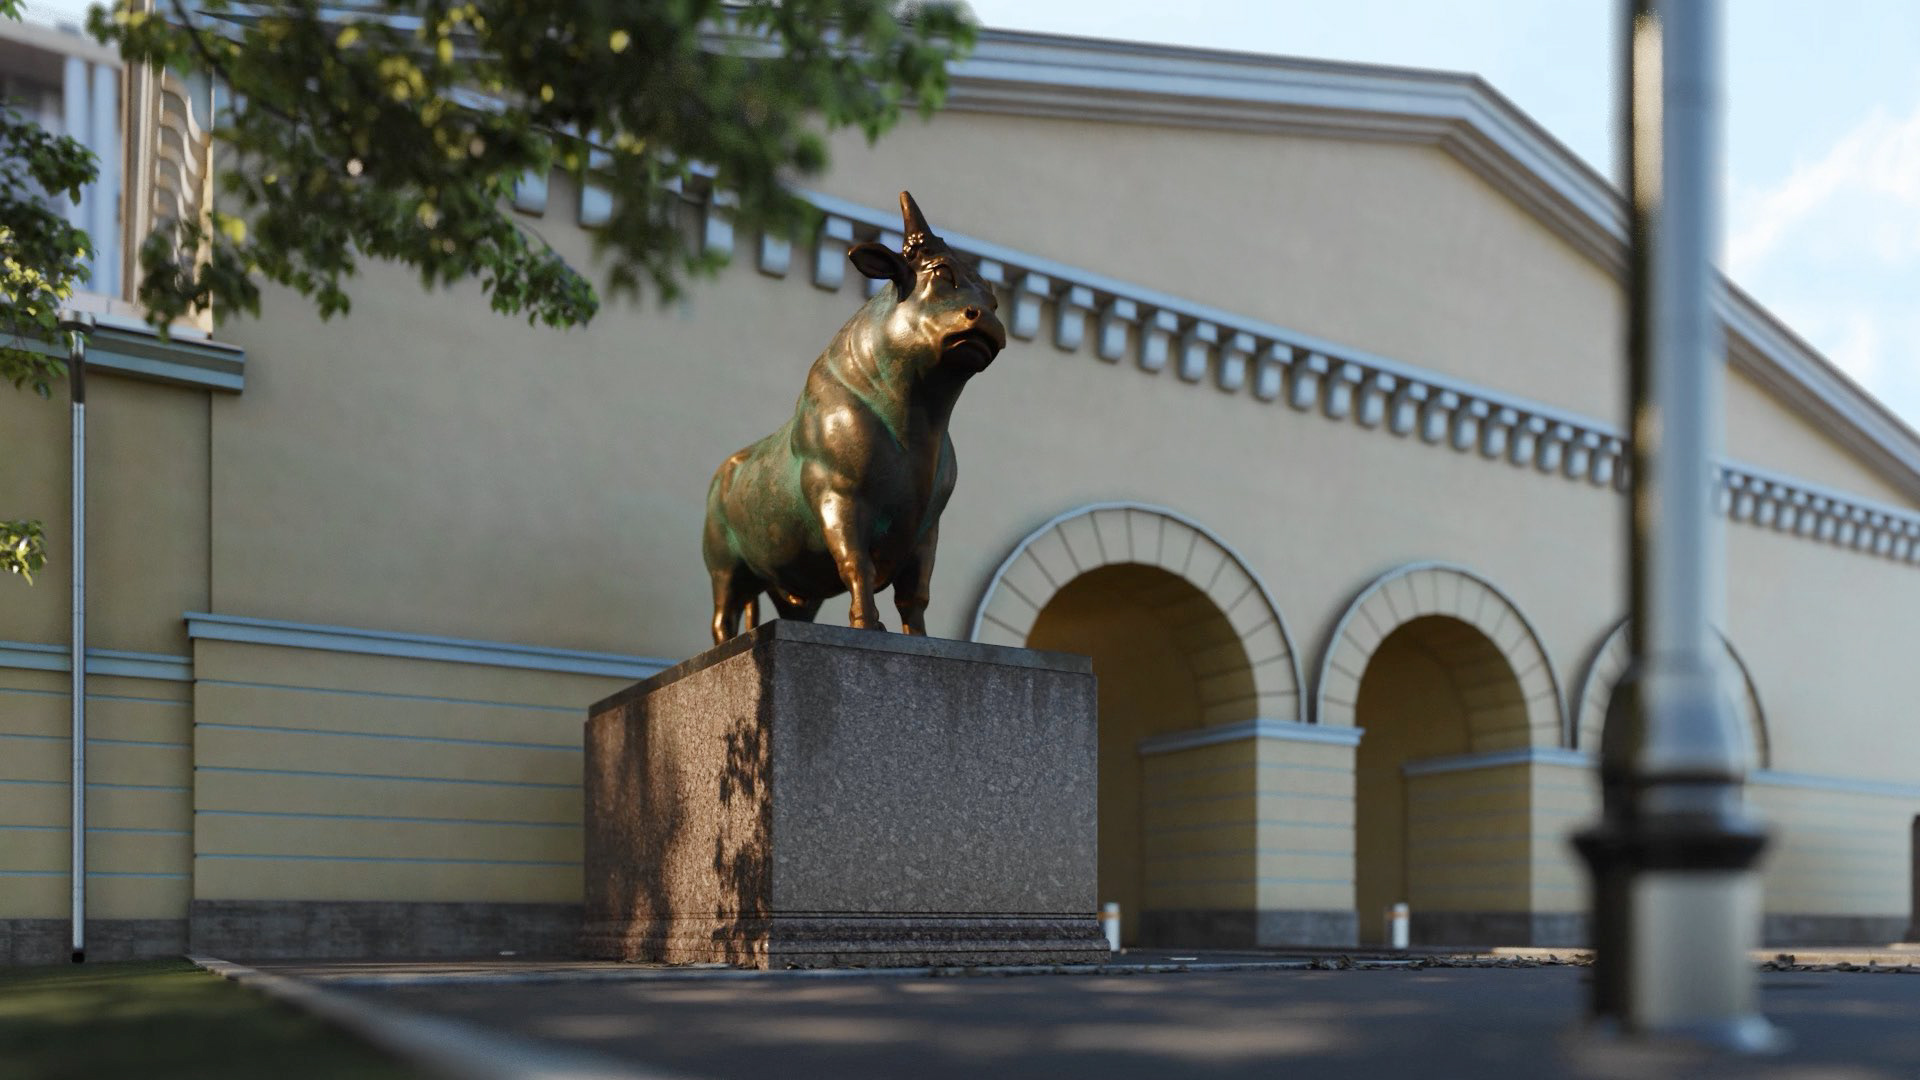 Historic entrance with bull sculpture, 3d rendering